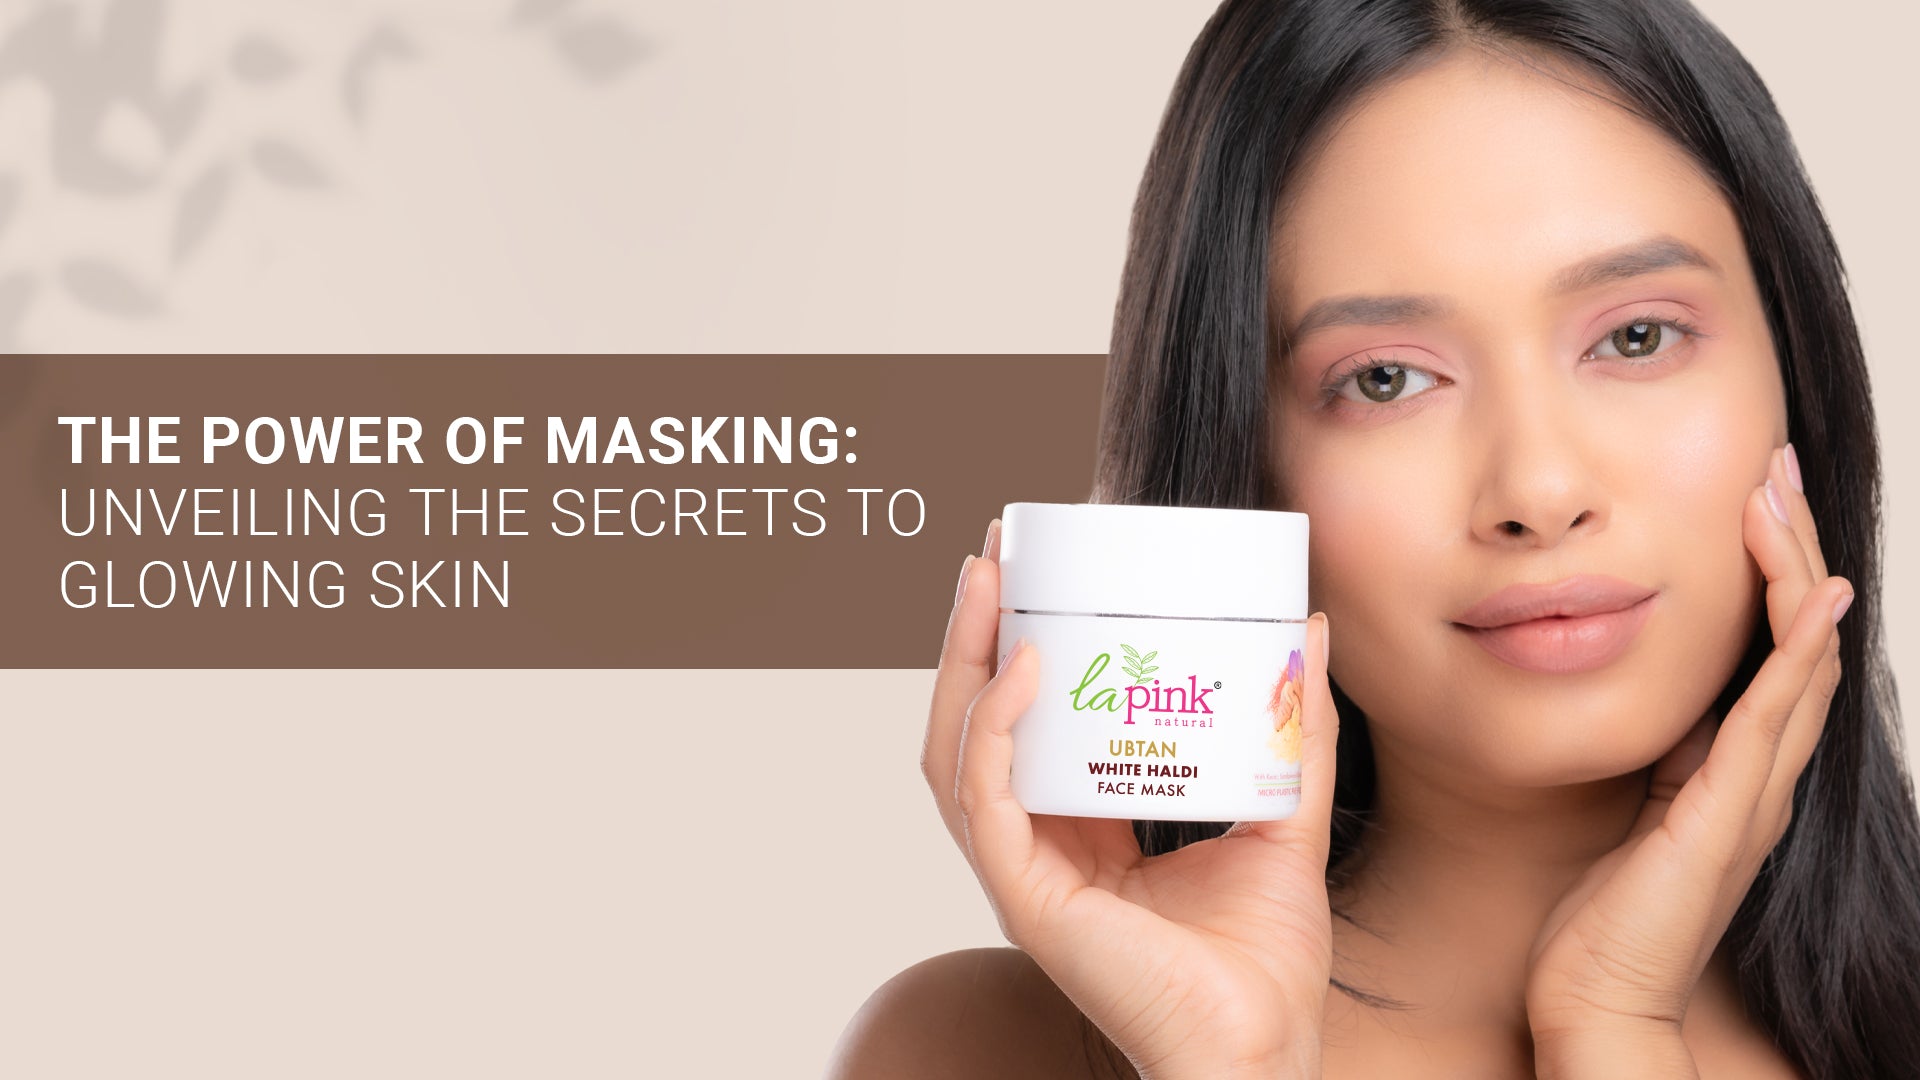 The Power of Masking: Unveiling the Secrets to Glowing Skin